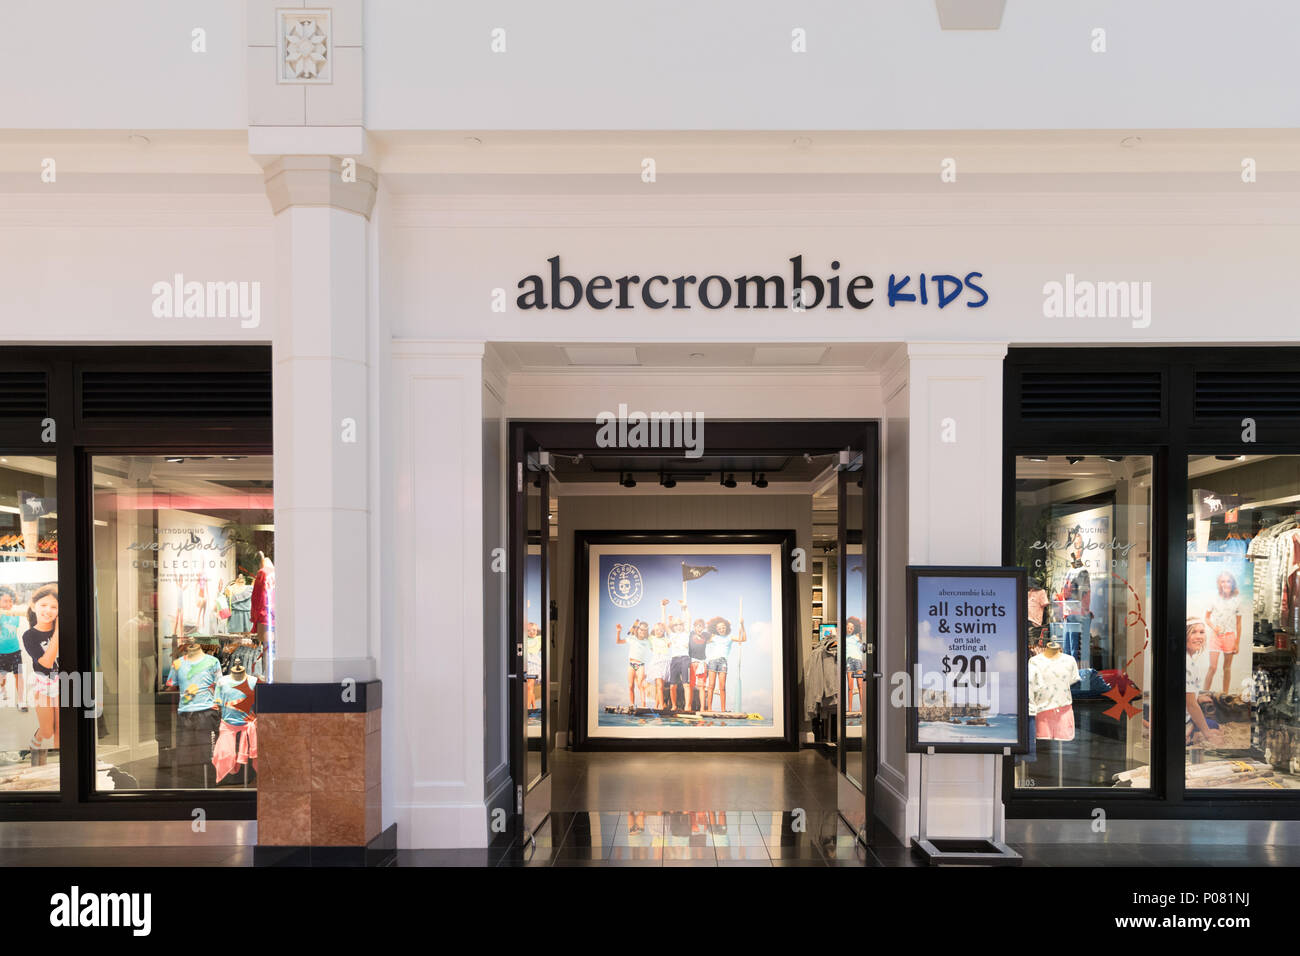 Abercrombie & Fitch  Authentic American clothing since 1892